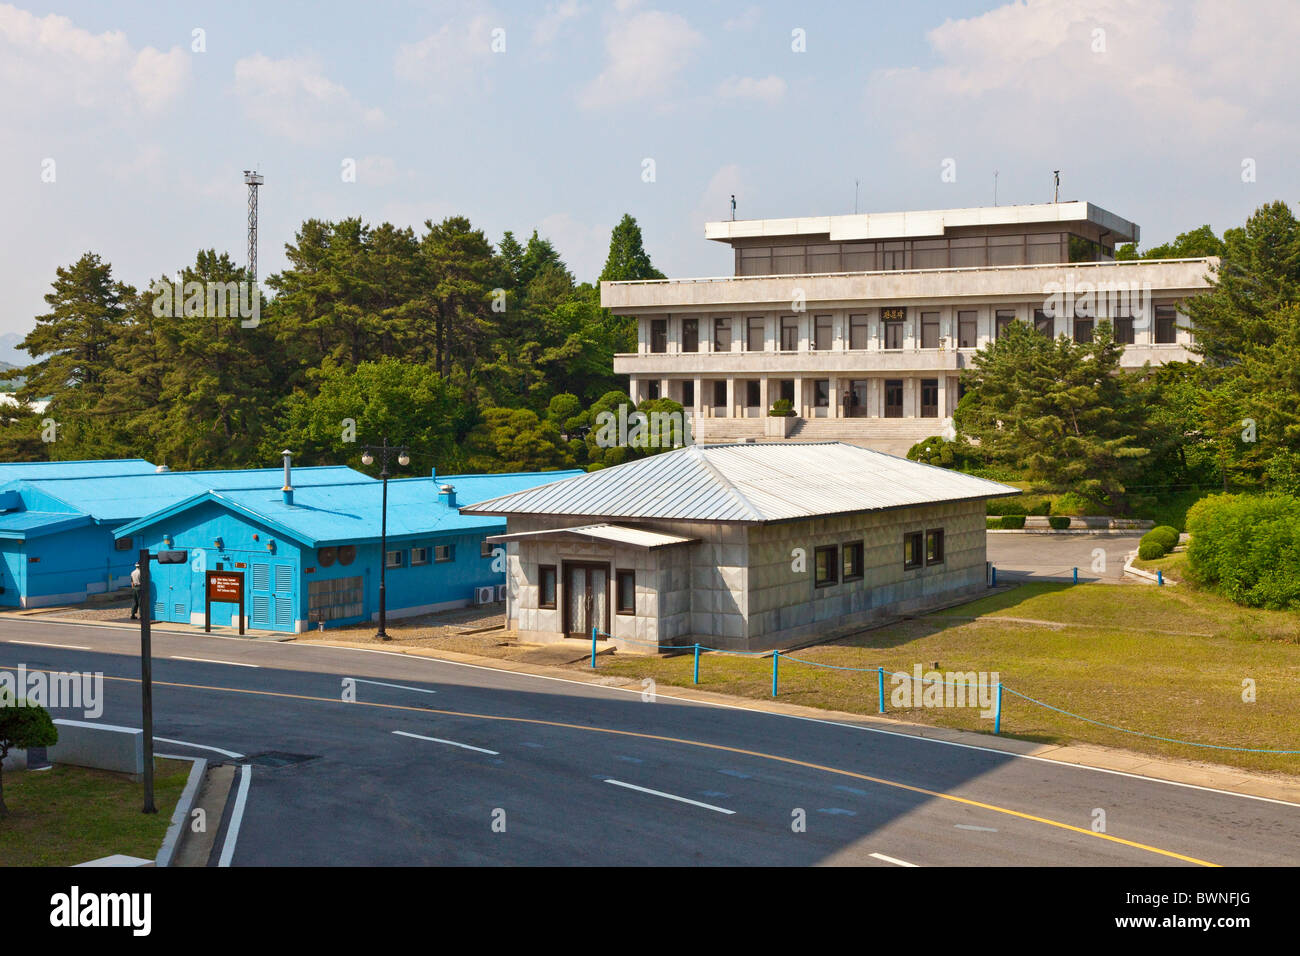 Looking over UN buildings to North Korean Panmon Hall building in JSA Joint Security Area, DMZ Demilitarized Zone. JMH3846 Stock Photo